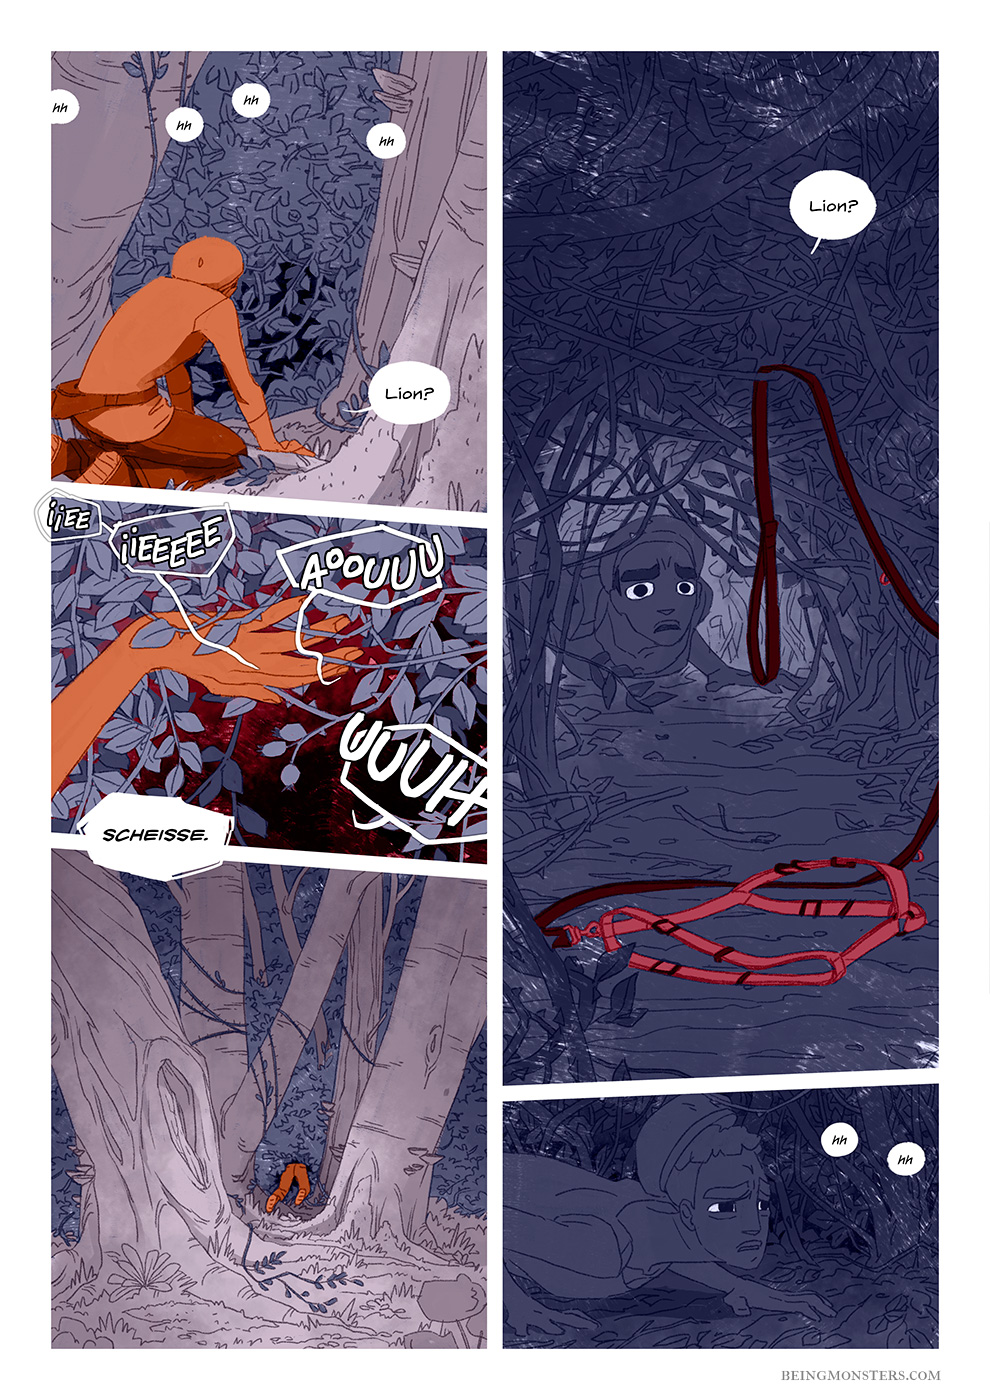 Being Monsters Book 1 Chapter 2 page 24 EN